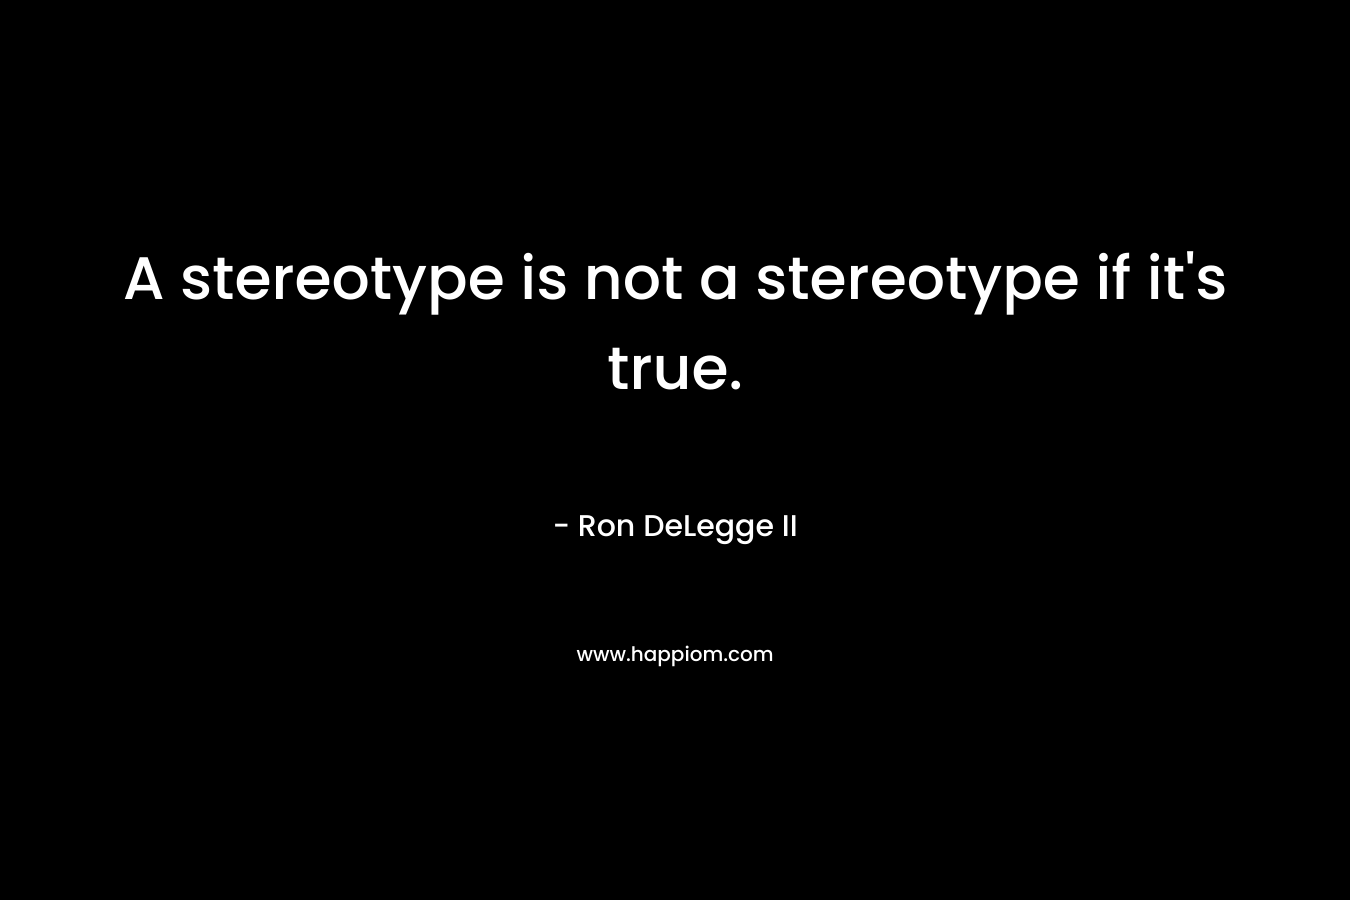 A stereotype is not a stereotype if it’s true. – Ron DeLegge II